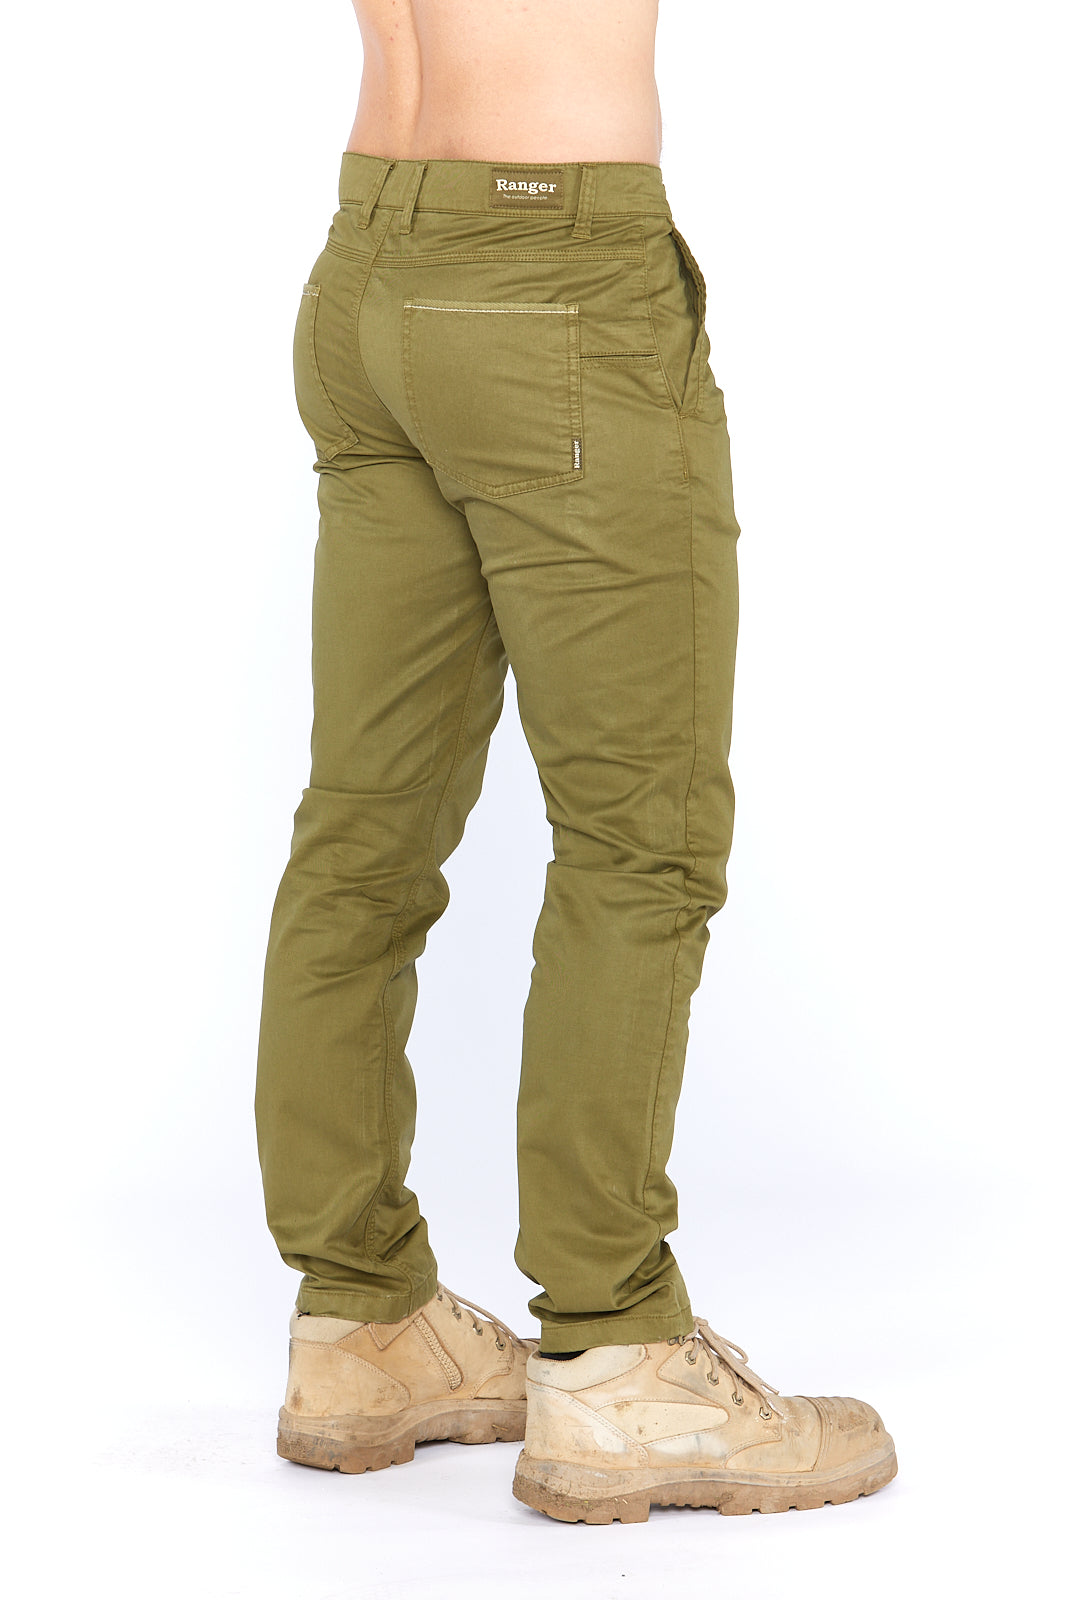 Barry Work Pant